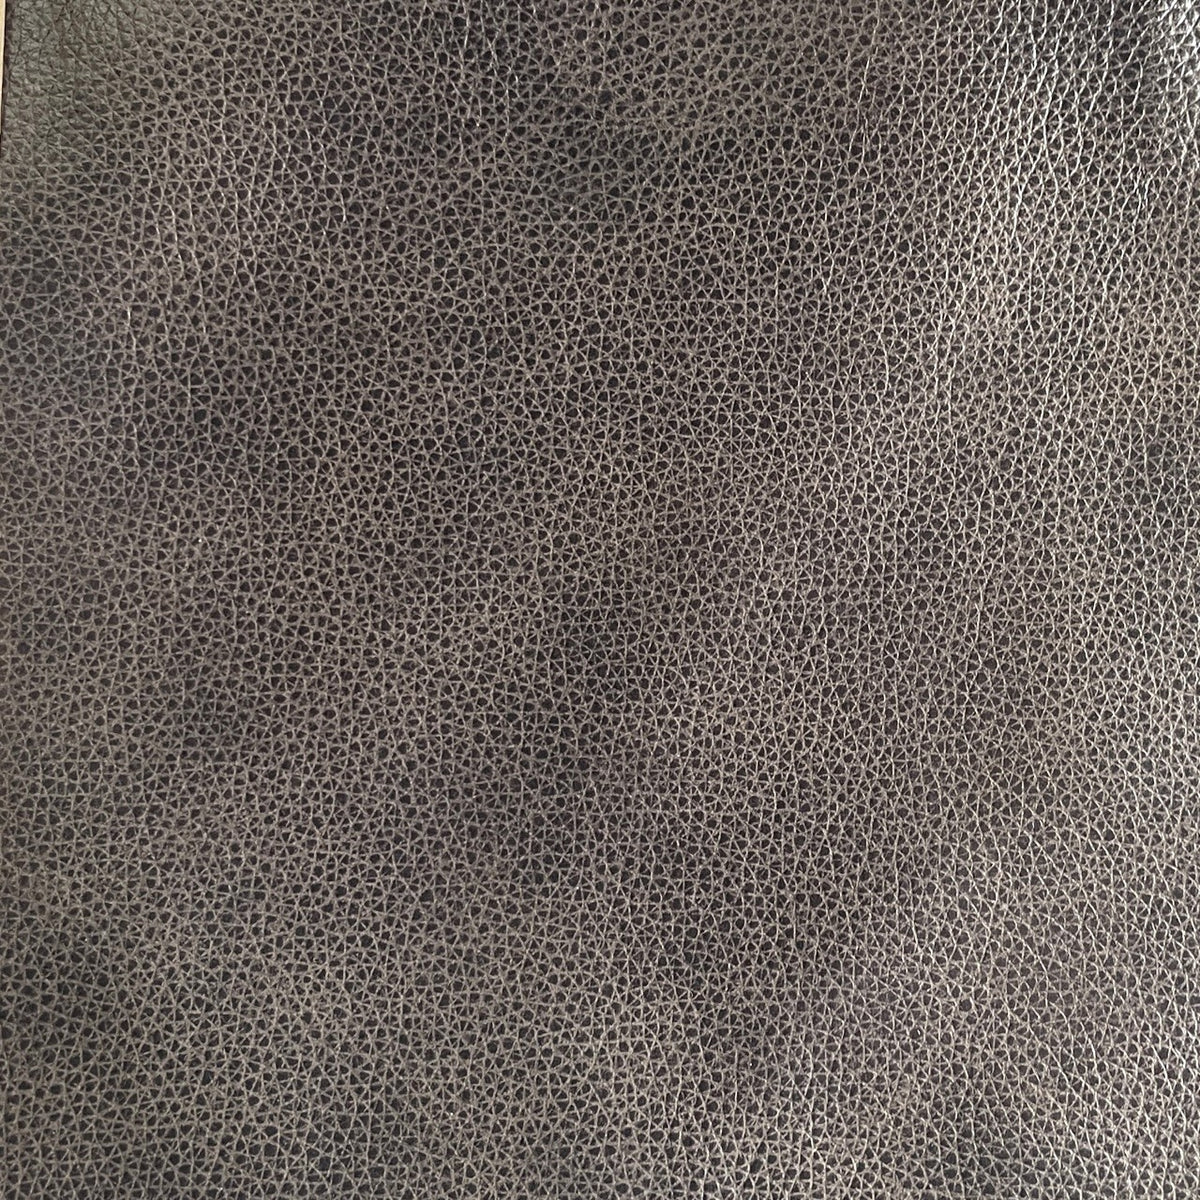 Upholstery Cow Hide #12 | 1.2mm | 6.85 sq.m | From $508 ea.